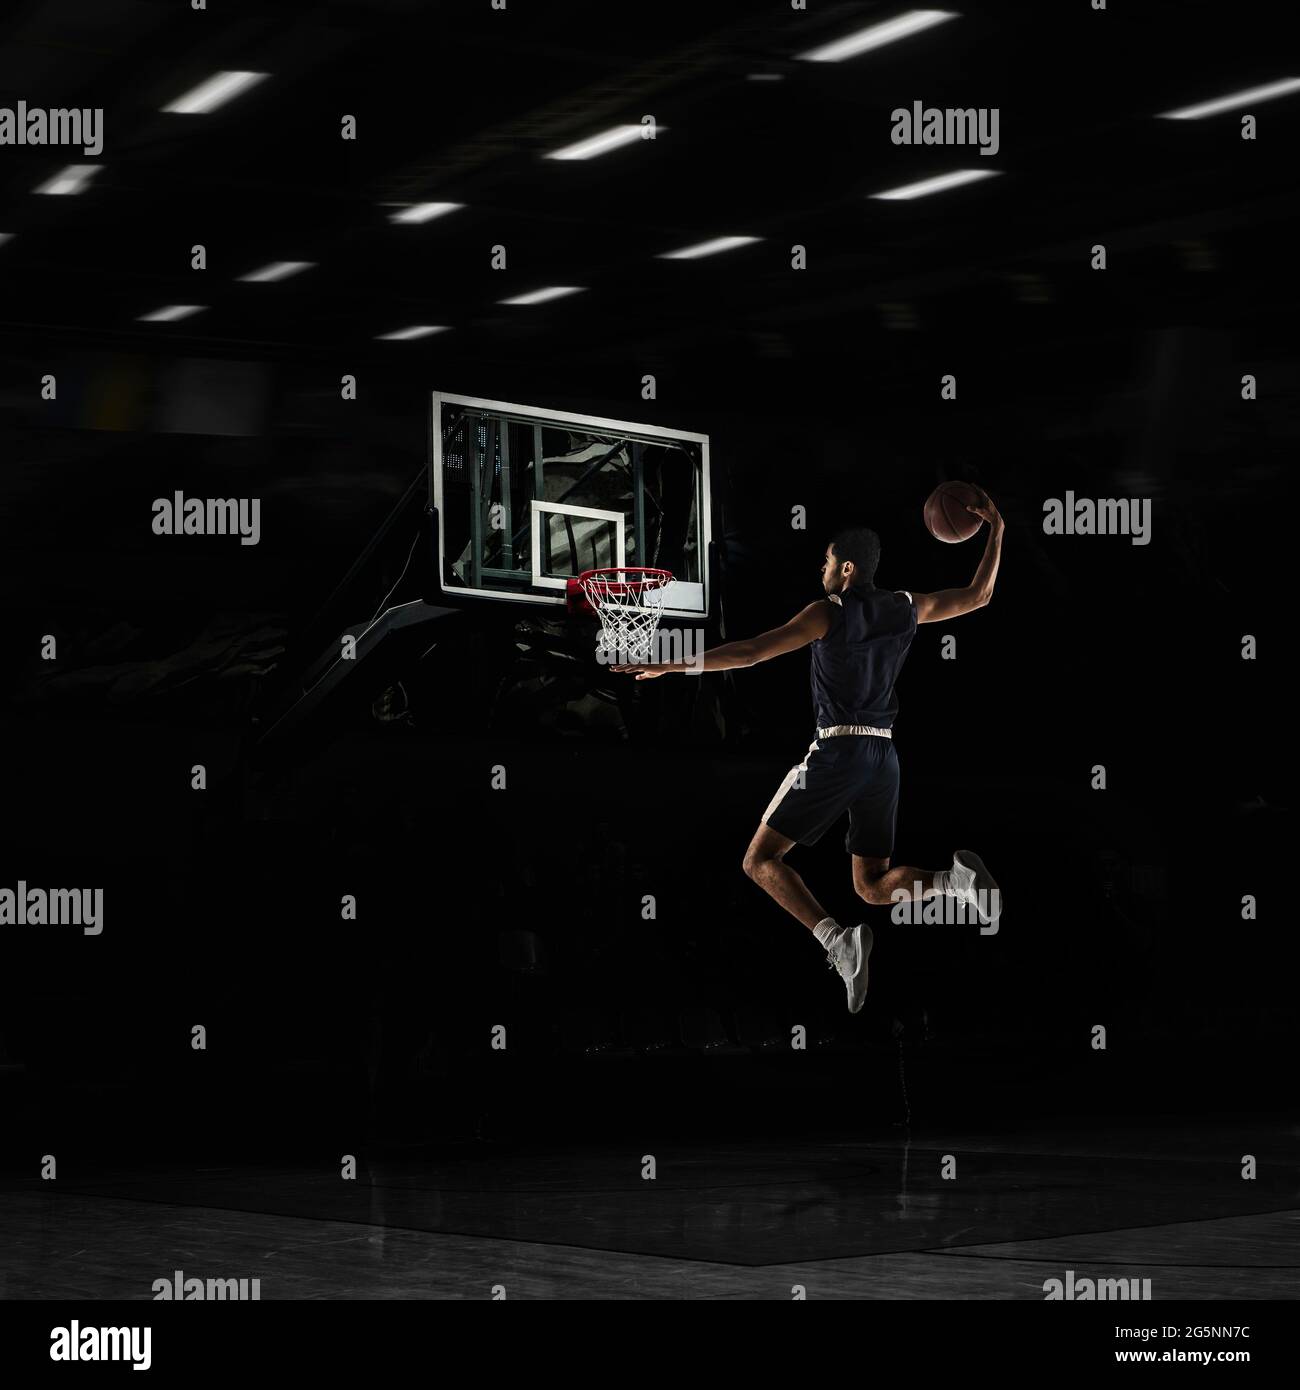 Young African sportsman, basketball player training in gym, idoors isolated on dark background. Concept of sport, game, competition. Slam dunk. Stock Photo